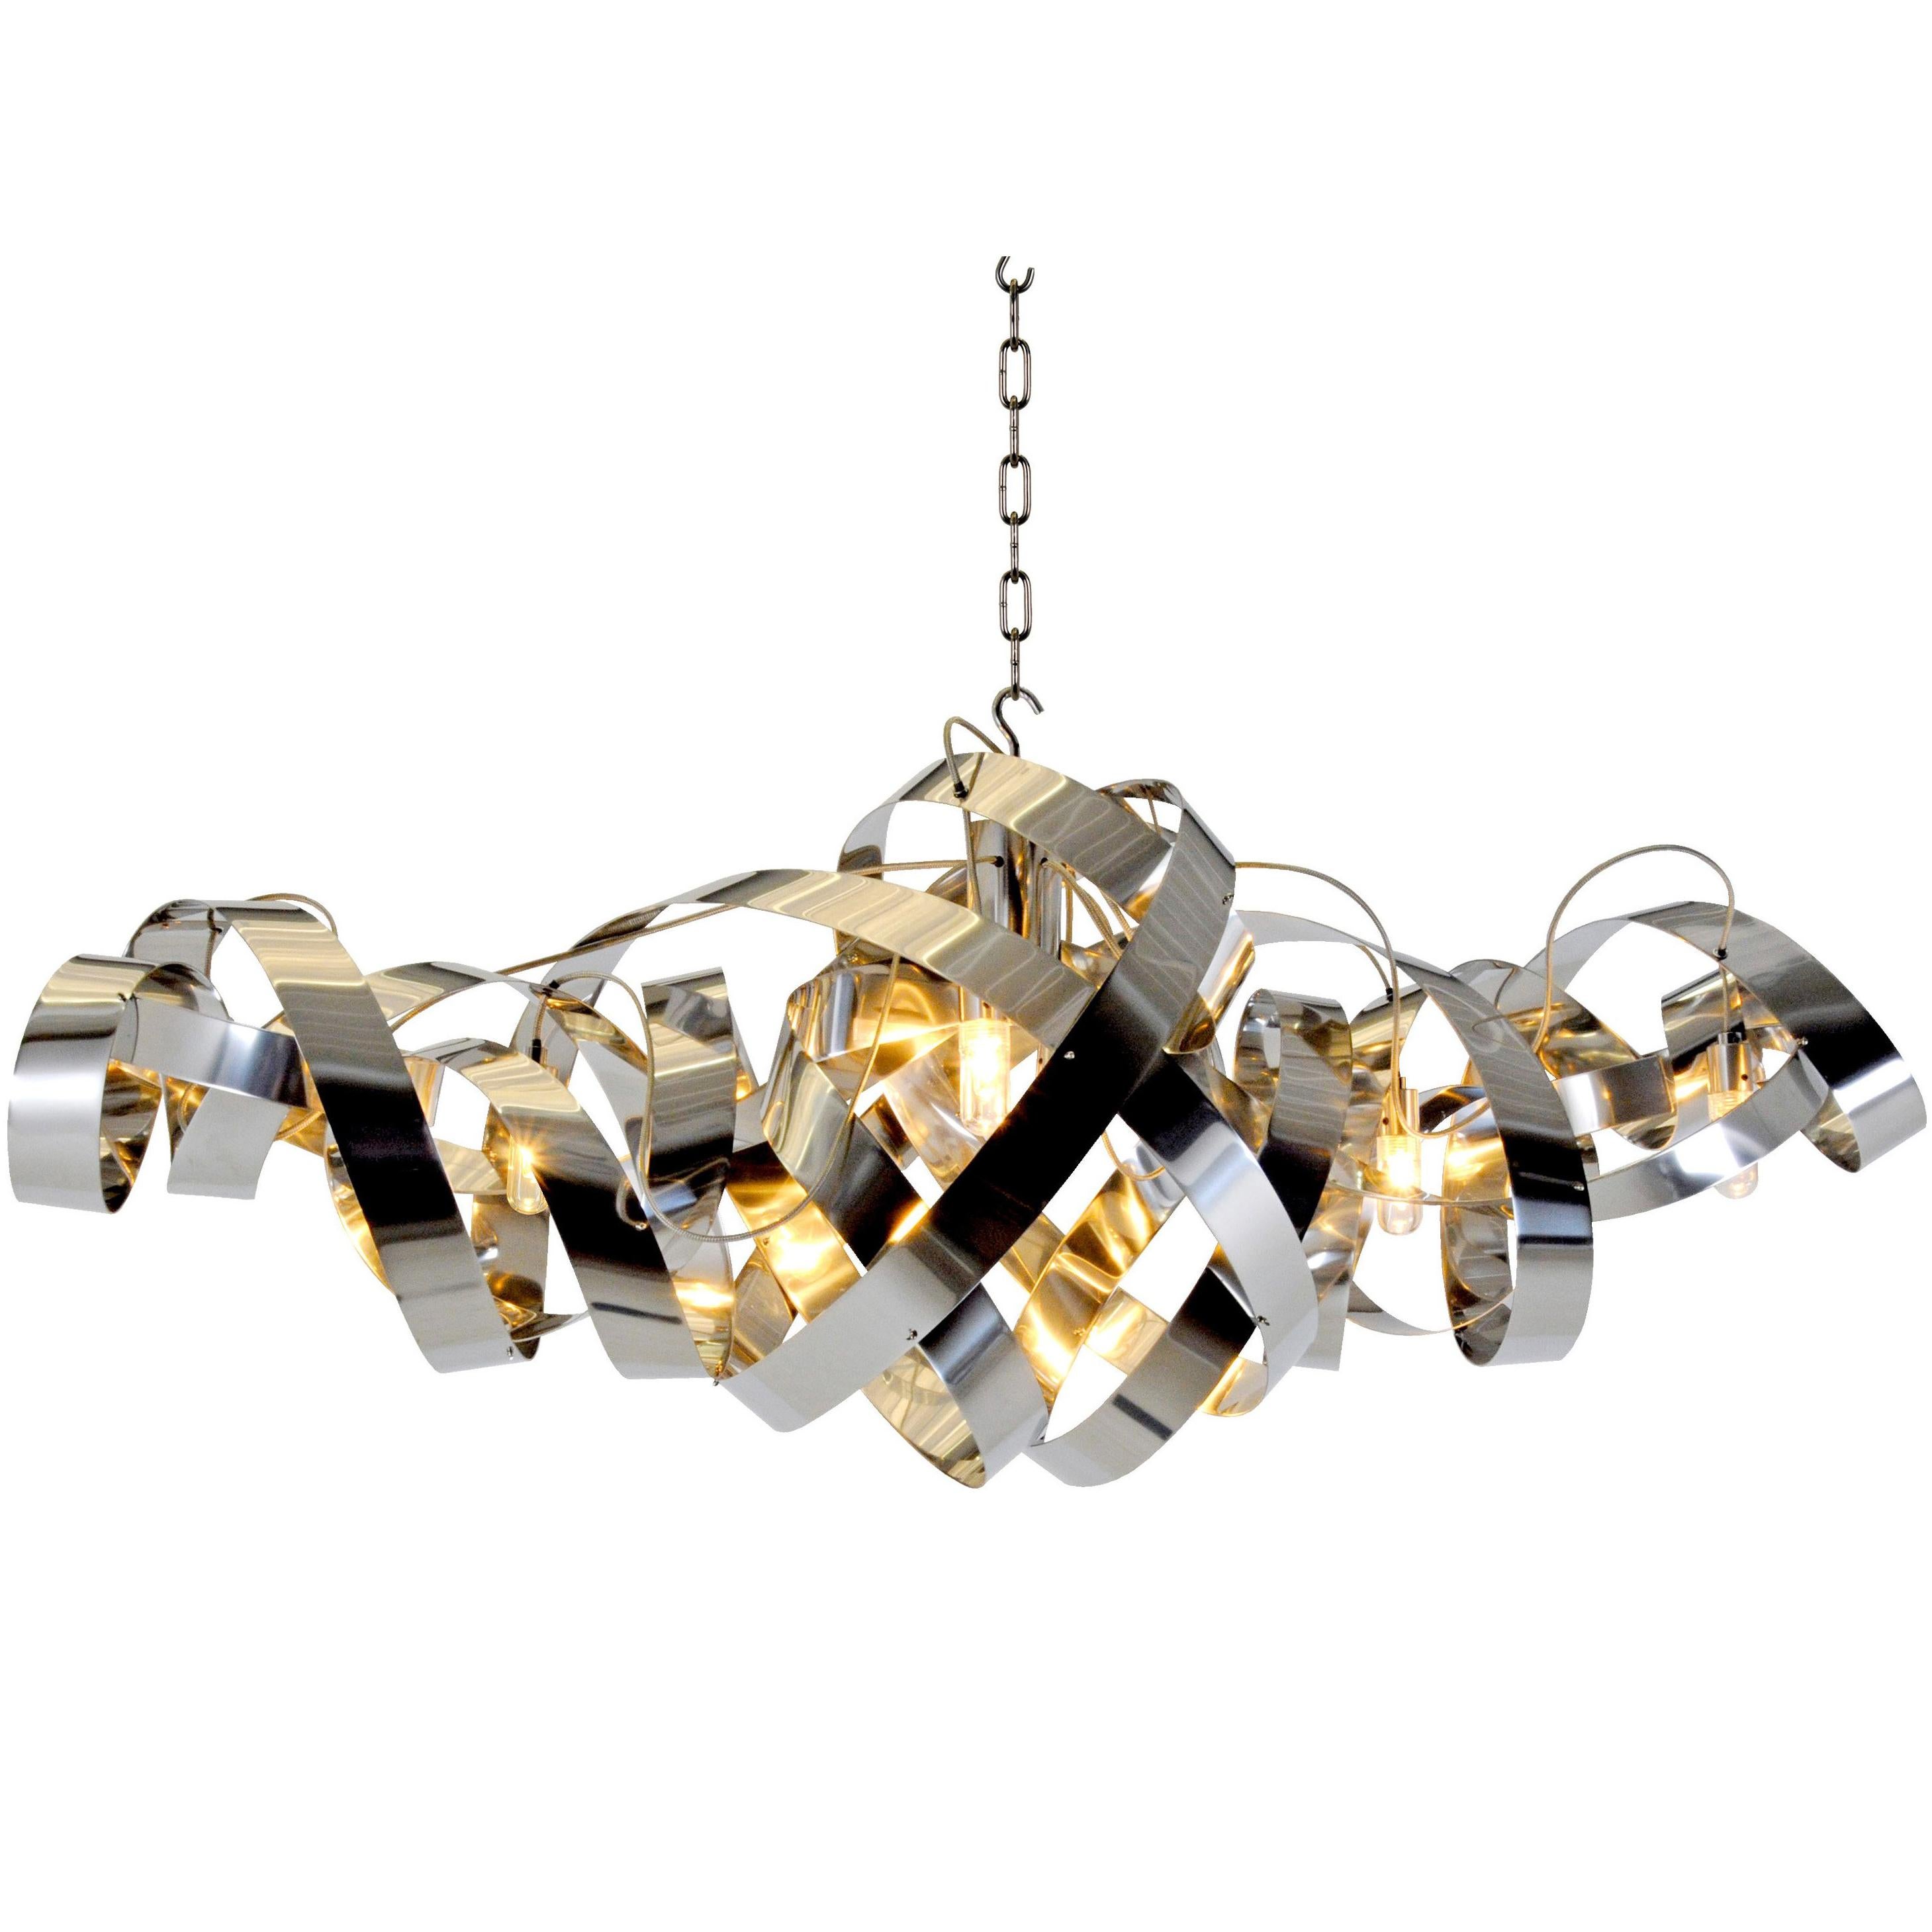 Jacco Maris Montone Oval Six Lights Chandelier in High Gloss Finish For Sale